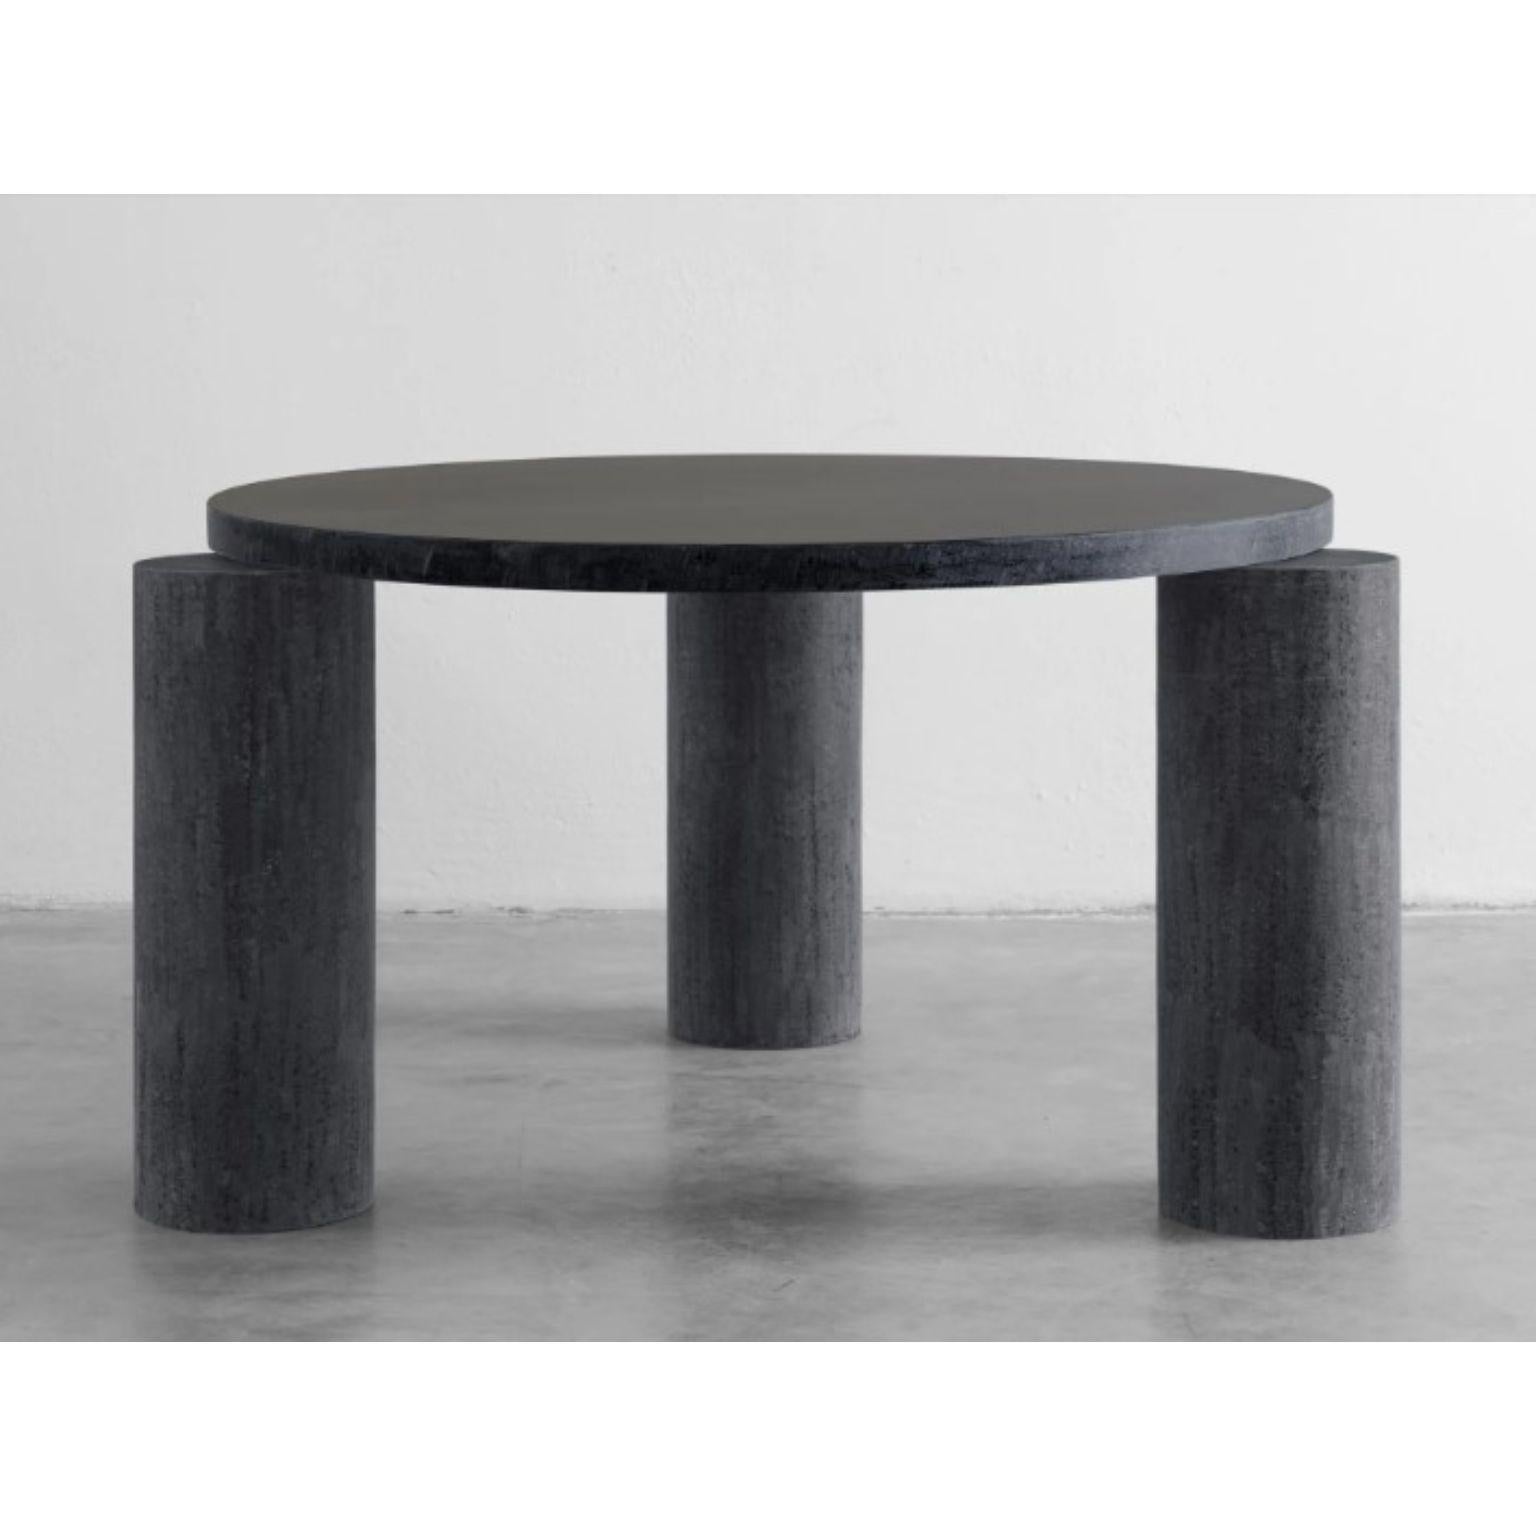 Orbit table by Imperfettolab
Dimensions: D 139 x H 74 cm 
Materials: Ceramic
Also available in different dimensions. 

Imperfetto Lab
Who we are ? We are a family.
Verter Turroni, Emanuela Ravelli and our children Elia, Margherita and